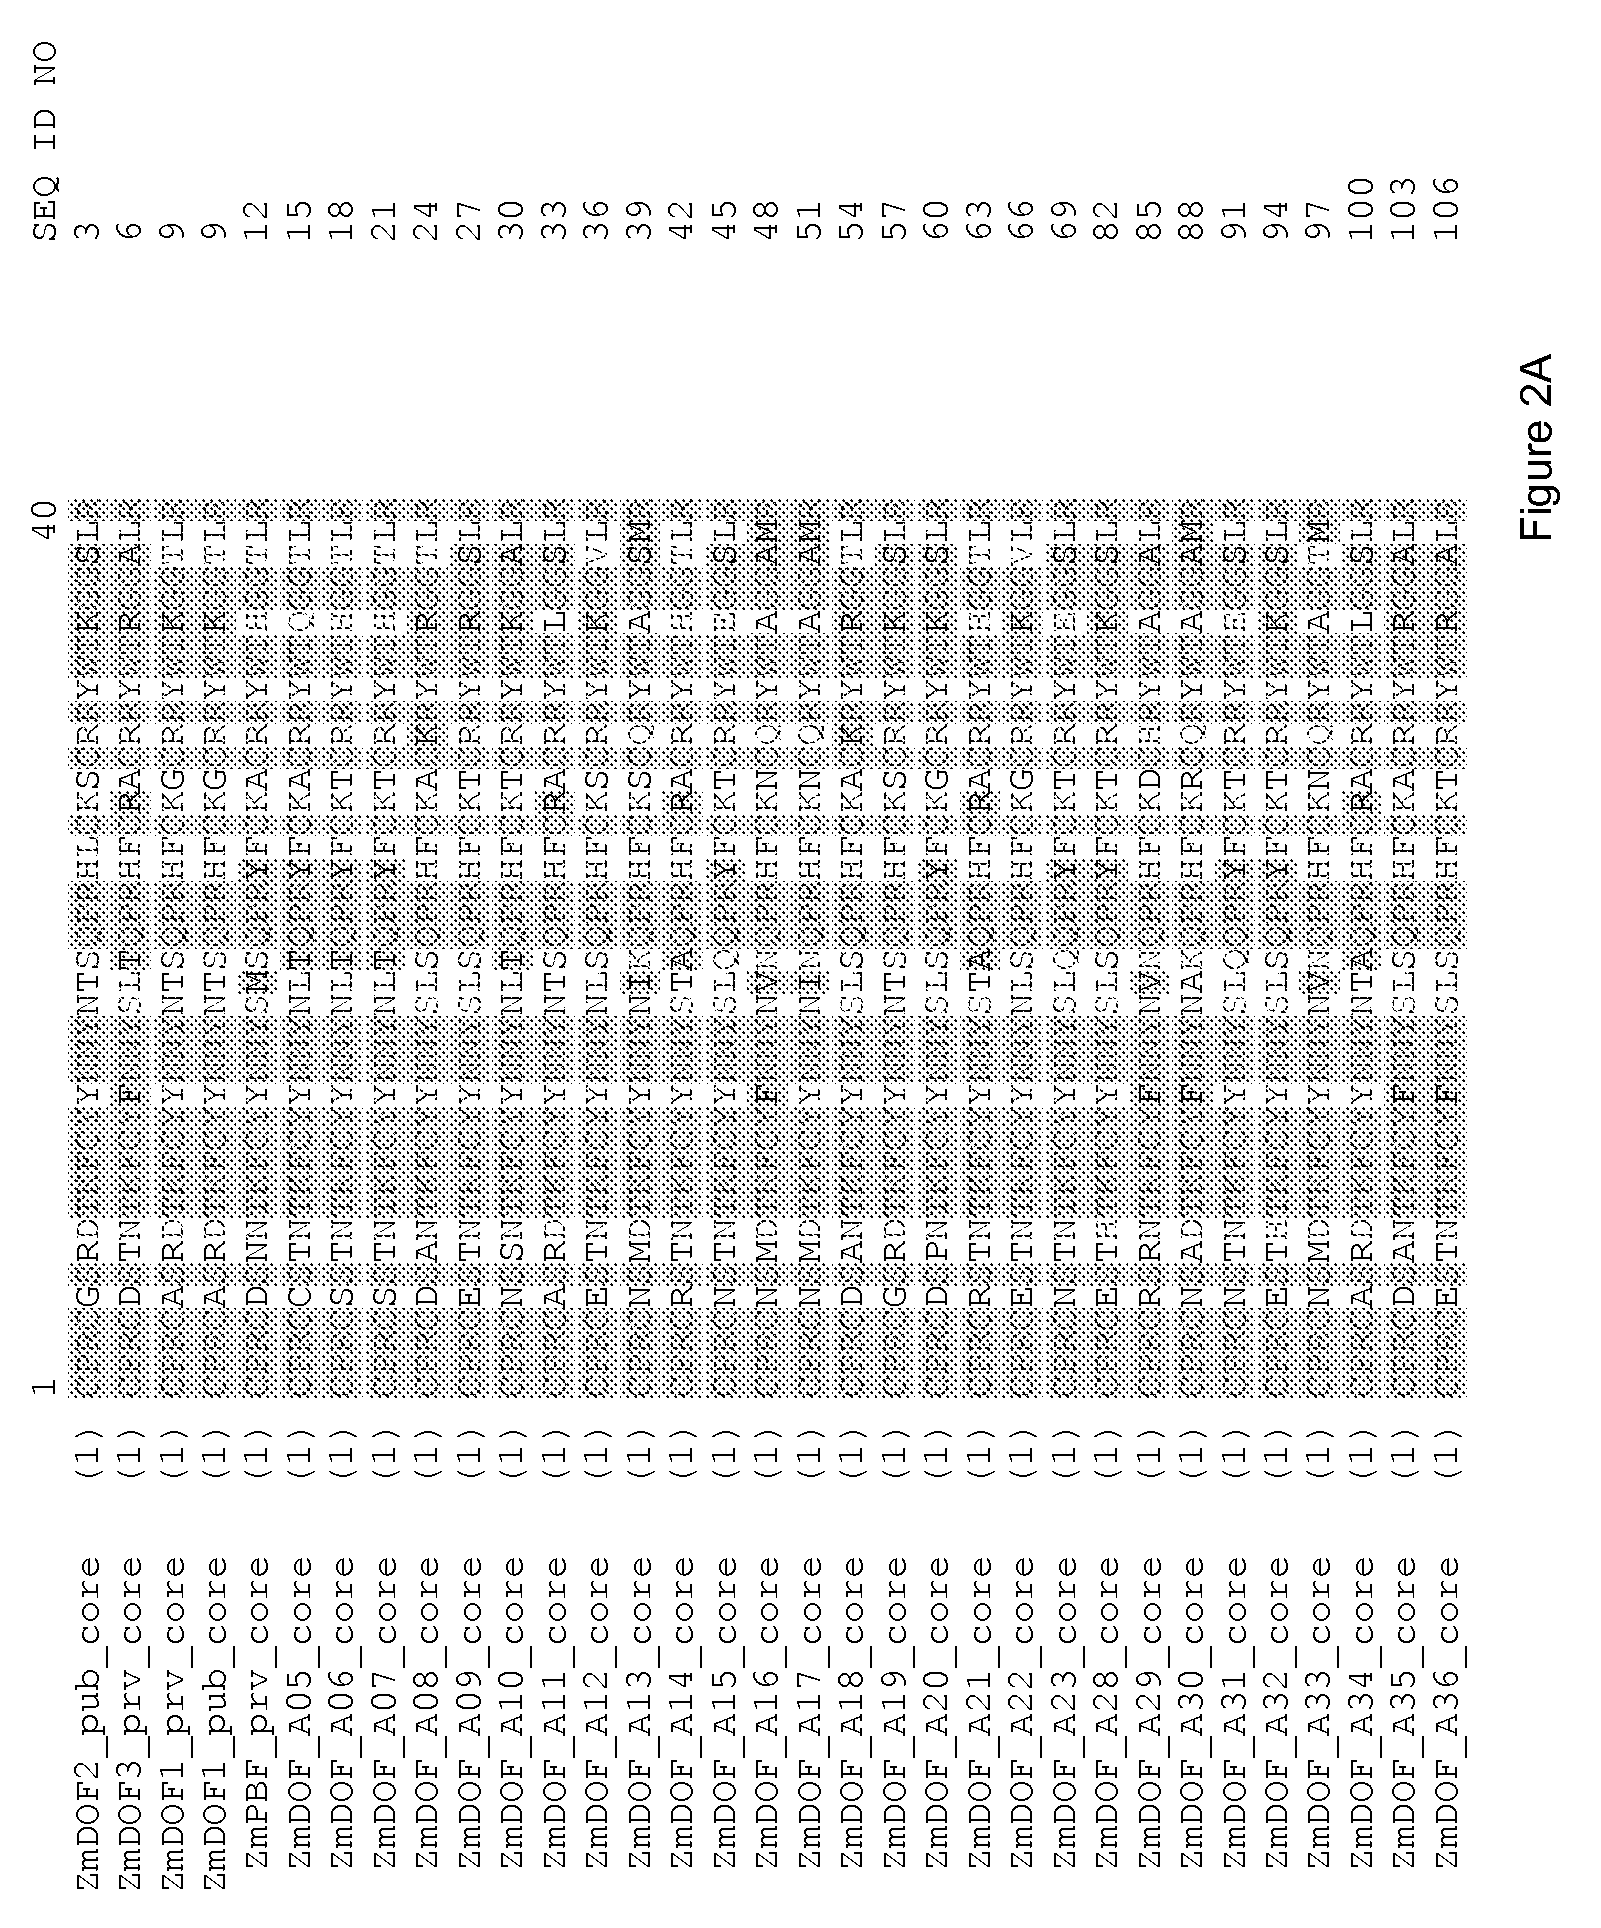 Dof (dna binding with one finger) sequences and methods of use